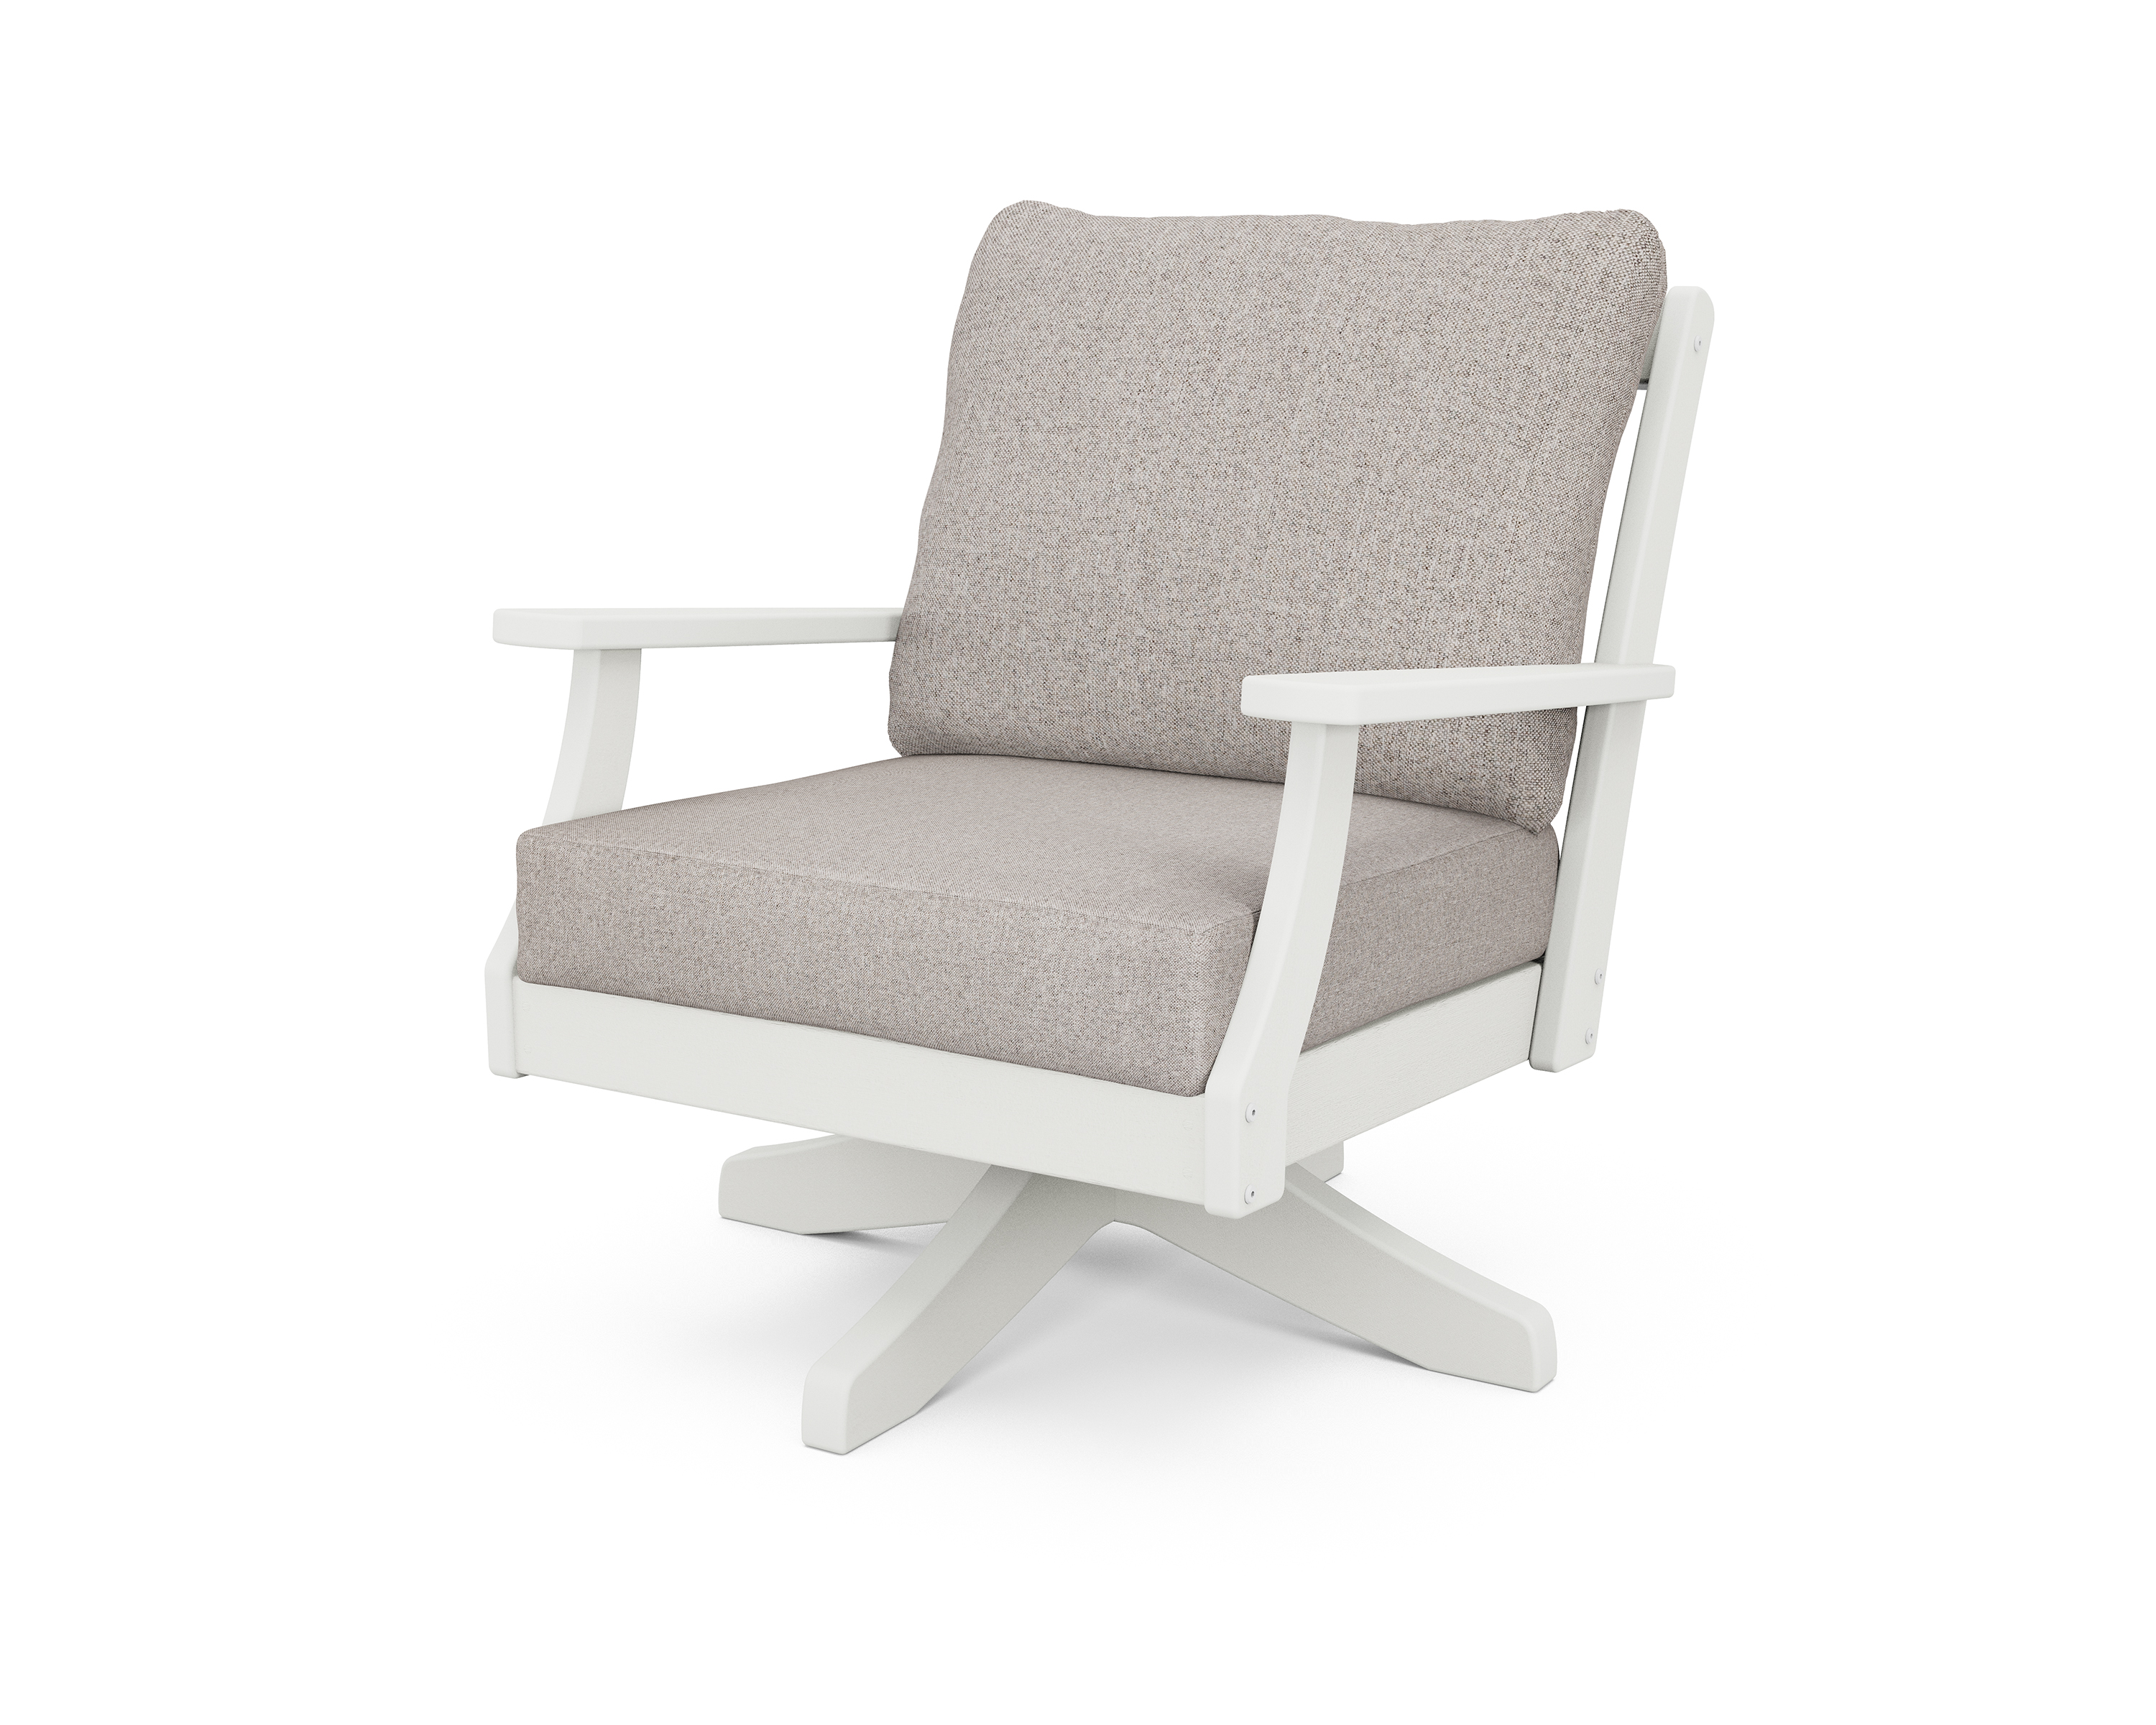 braxton deep seating swivel chair in vintage white / weathered tweed product image